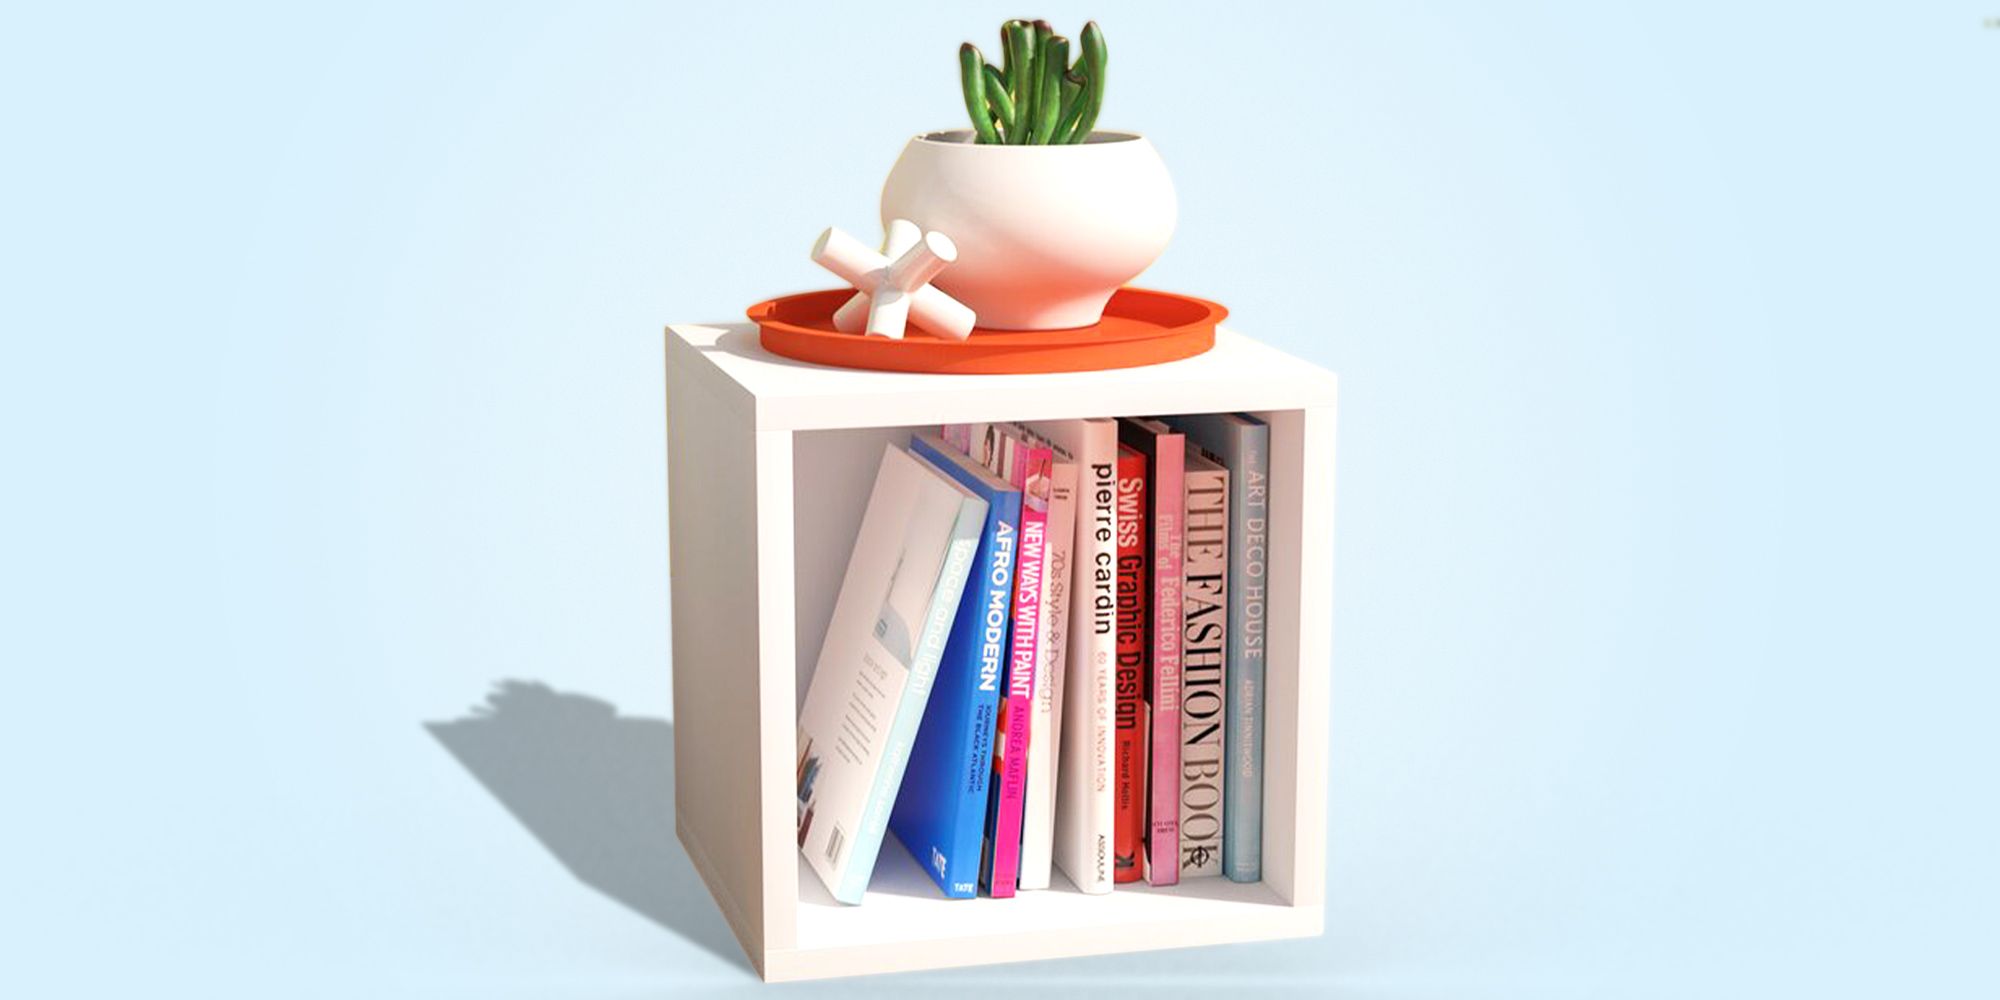 Mini designer book collection all in stock now. Perfect shelf